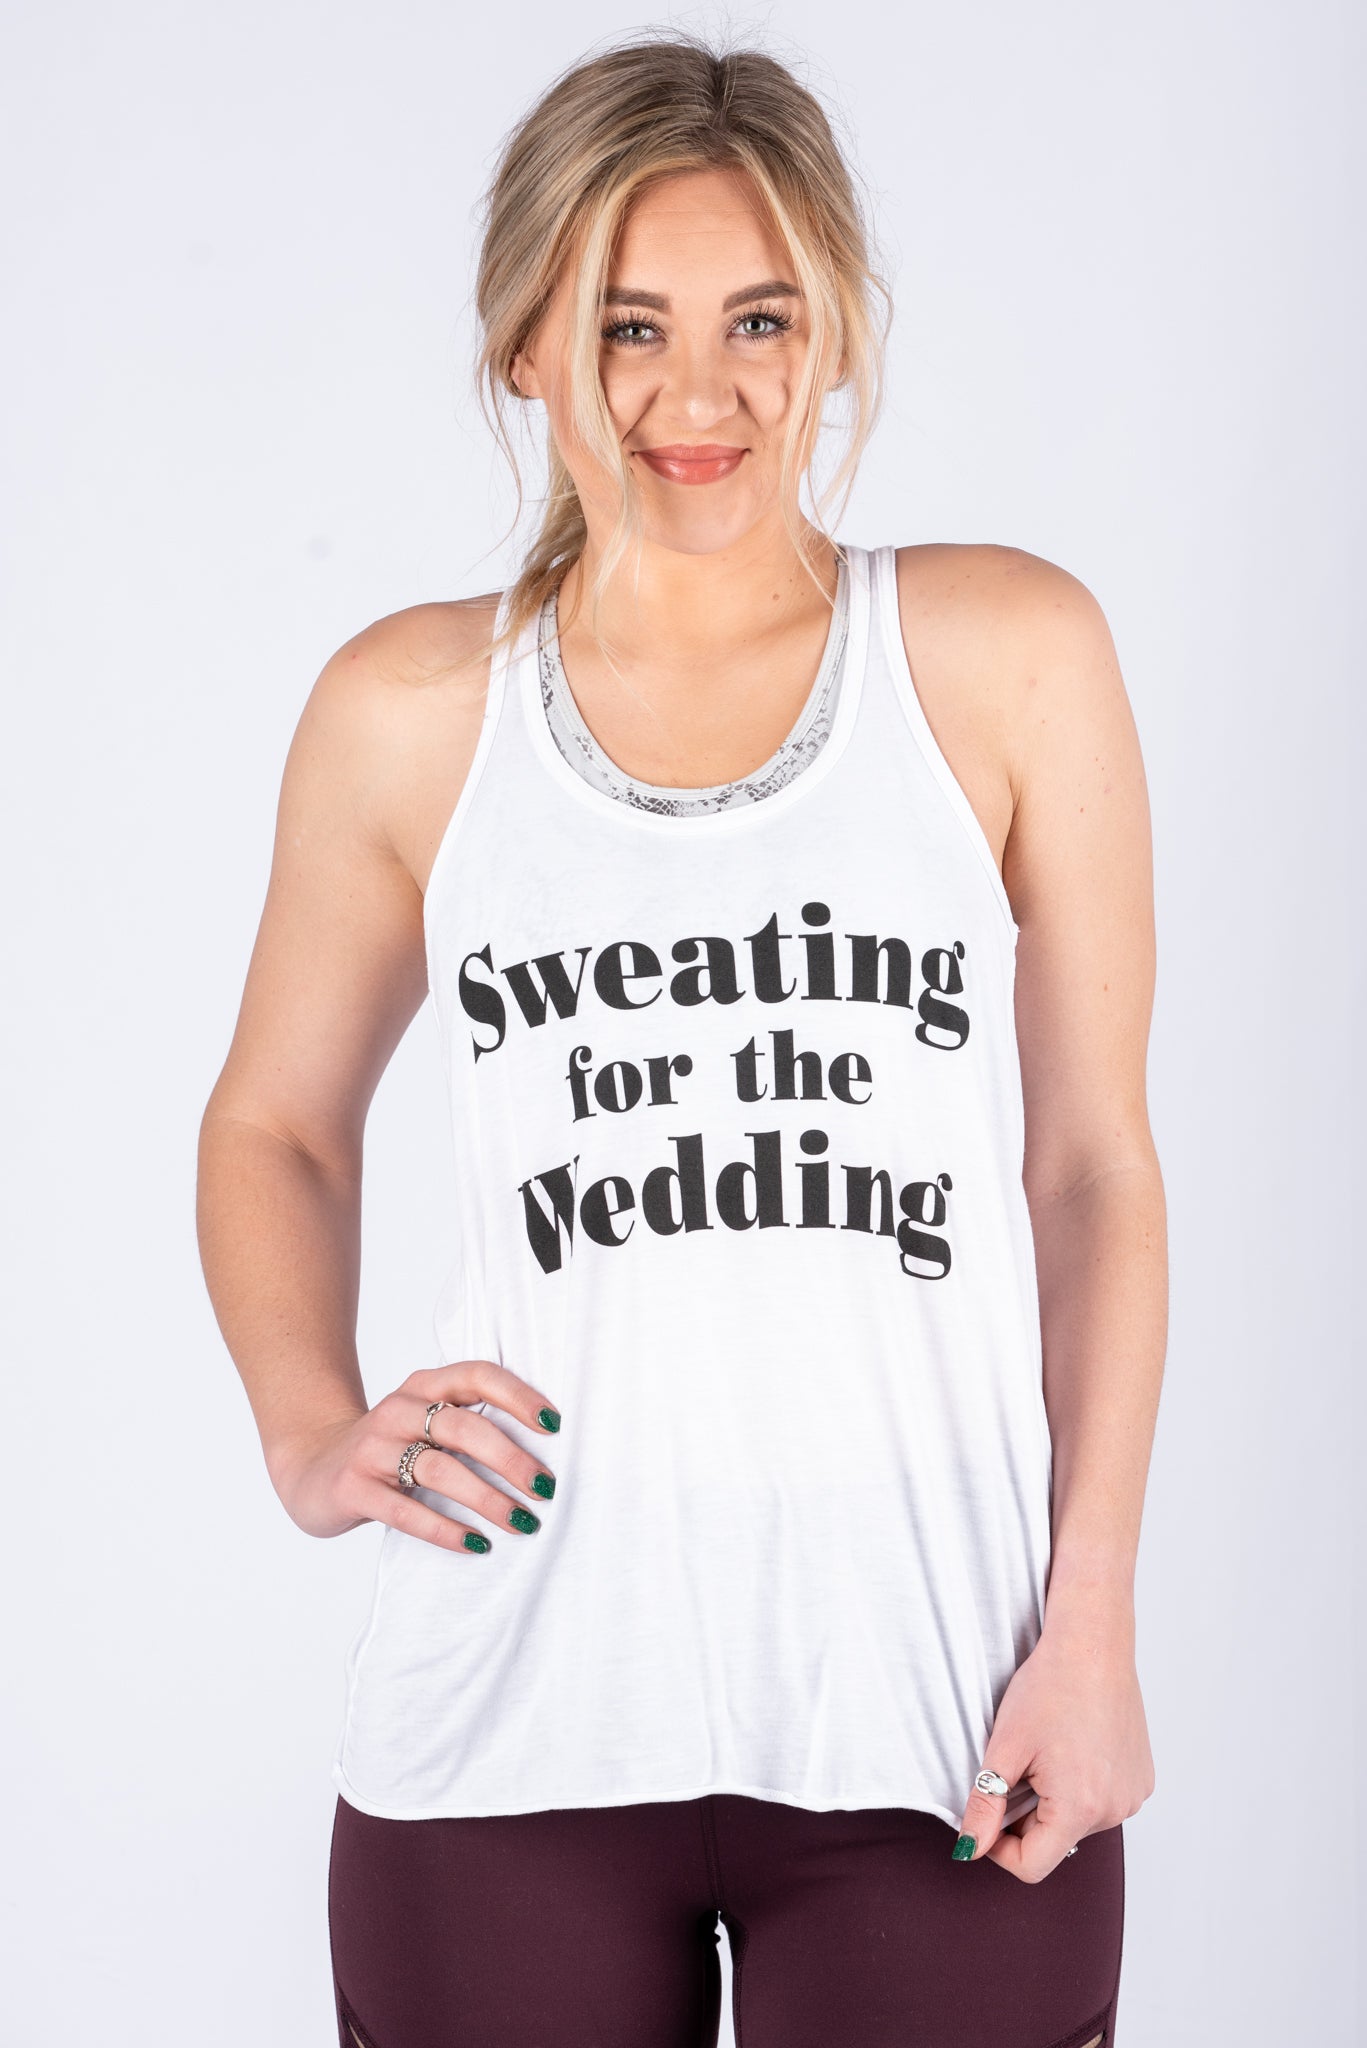 Sweating for the wedding racer flowy tank top white - Cute Tank Top - Funny T-Shirts at Lush Fashion Lounge Boutique in Oklahoma City